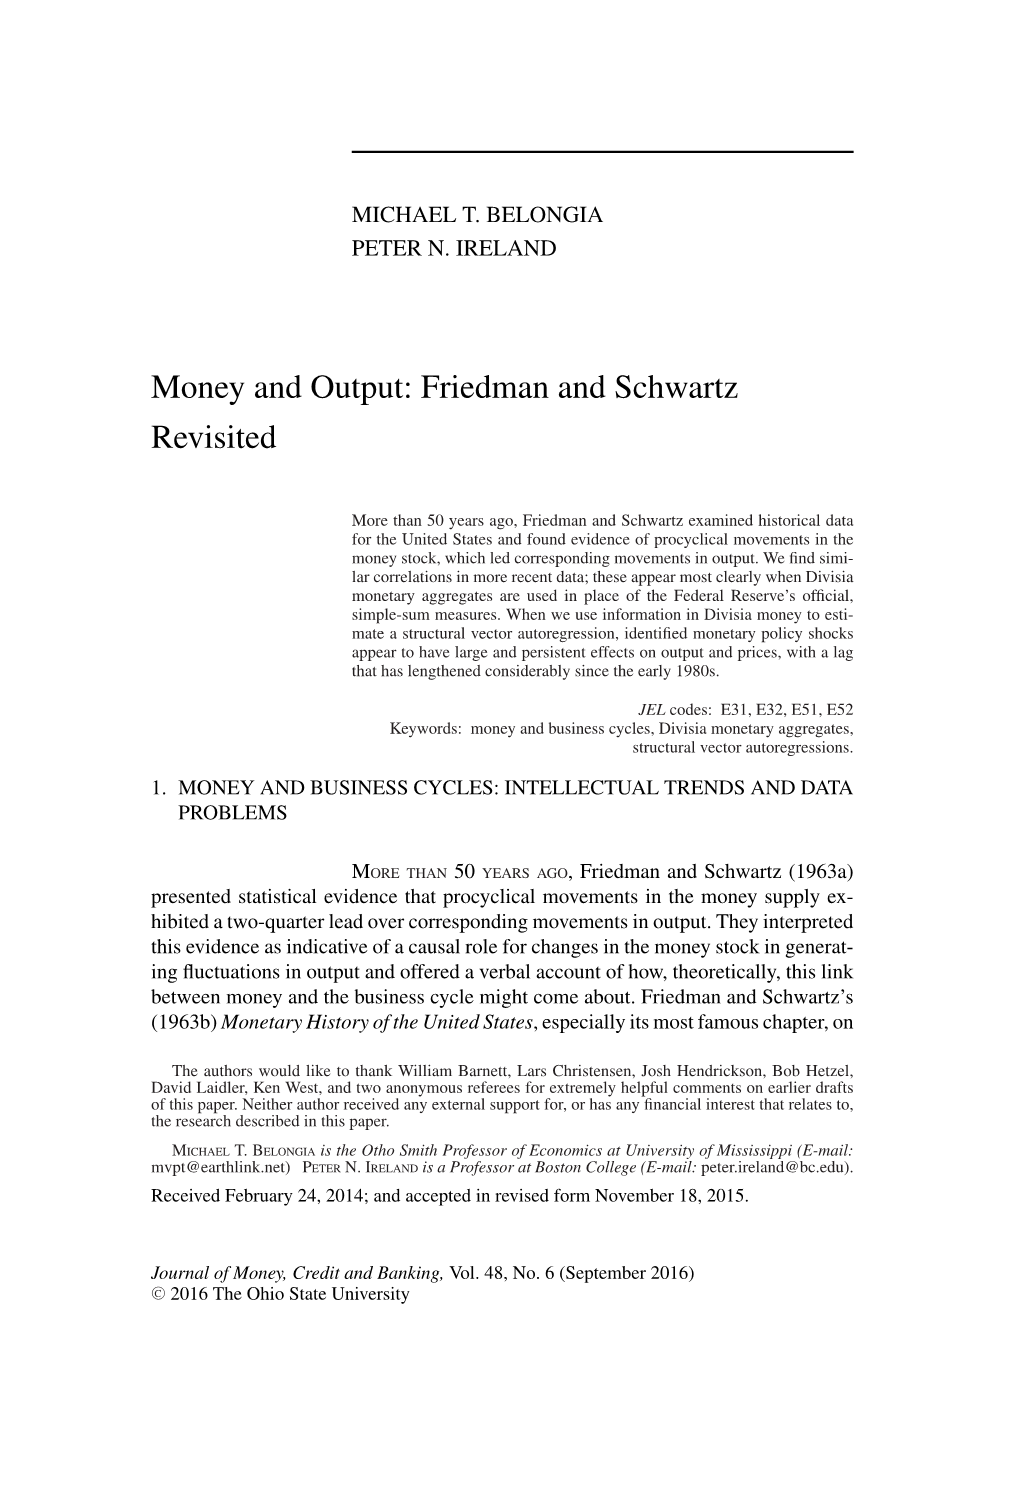 Money and Output: Friedman and Schwartz Revisited